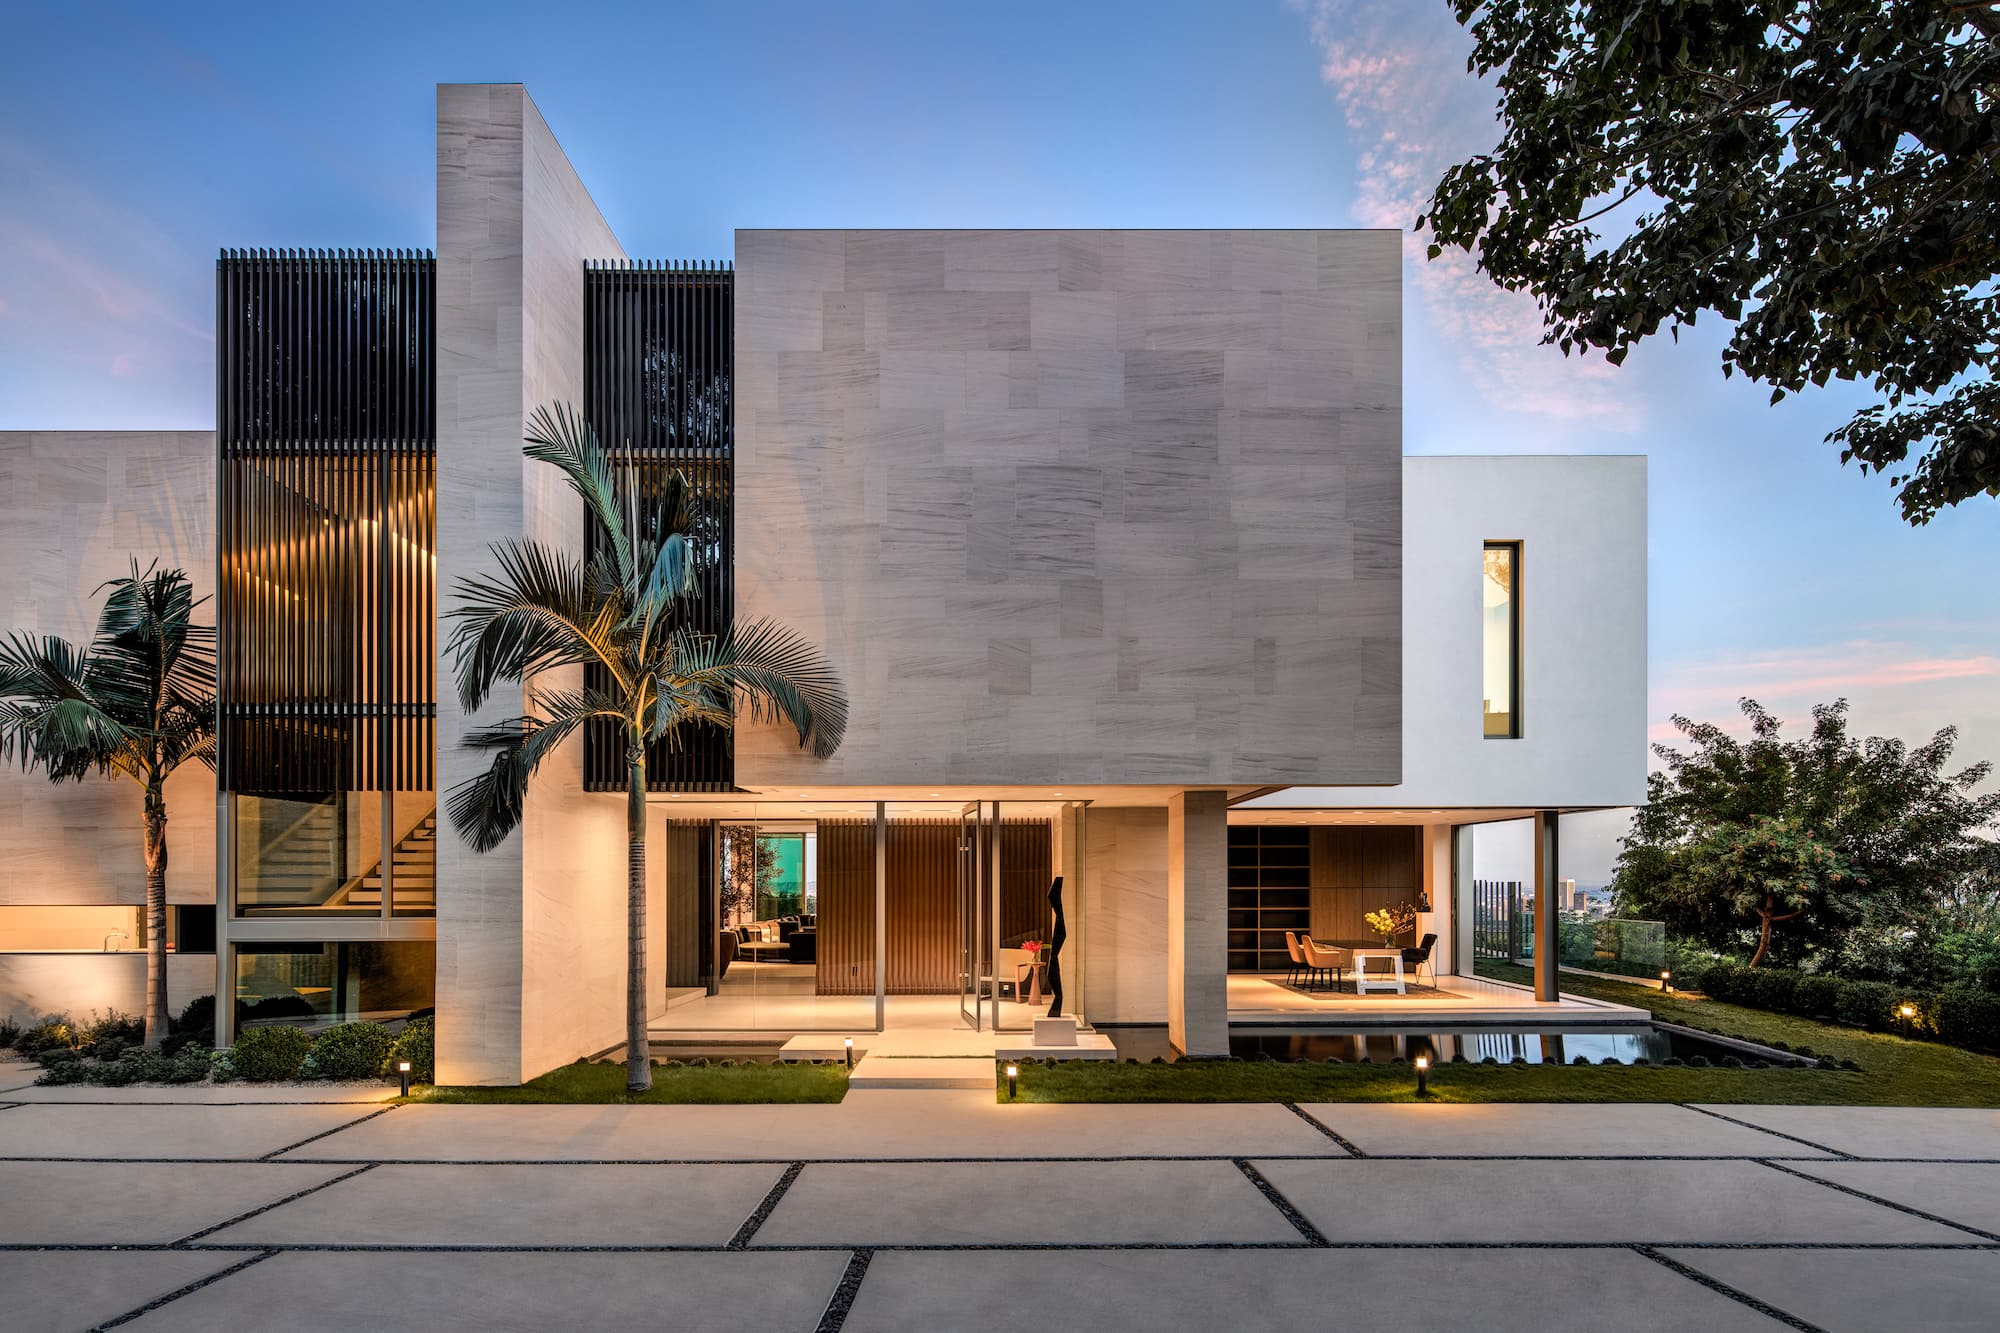 Stradella in Bel Air, Los Angeles, by SAOTA featured